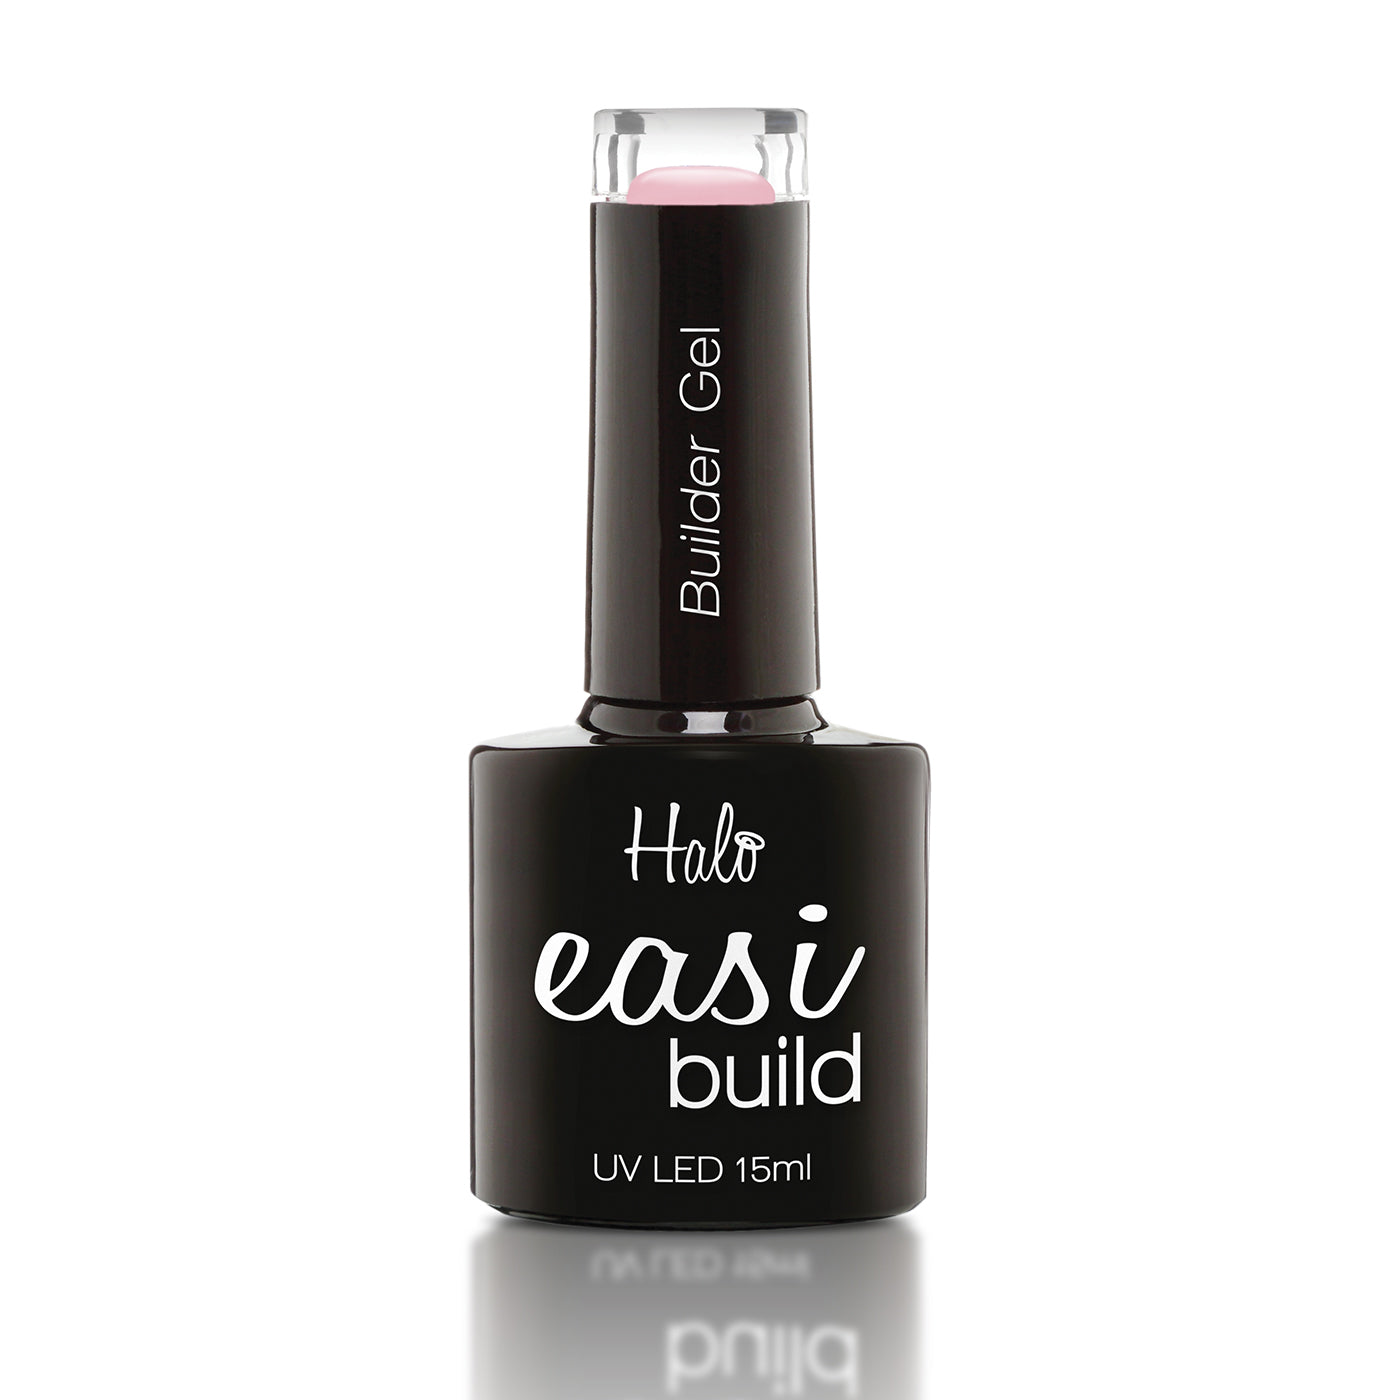 Halo Easi Build Builder Gel - Dare 2 Bare Pink (15ml) - Ultimate Hair and Beauty